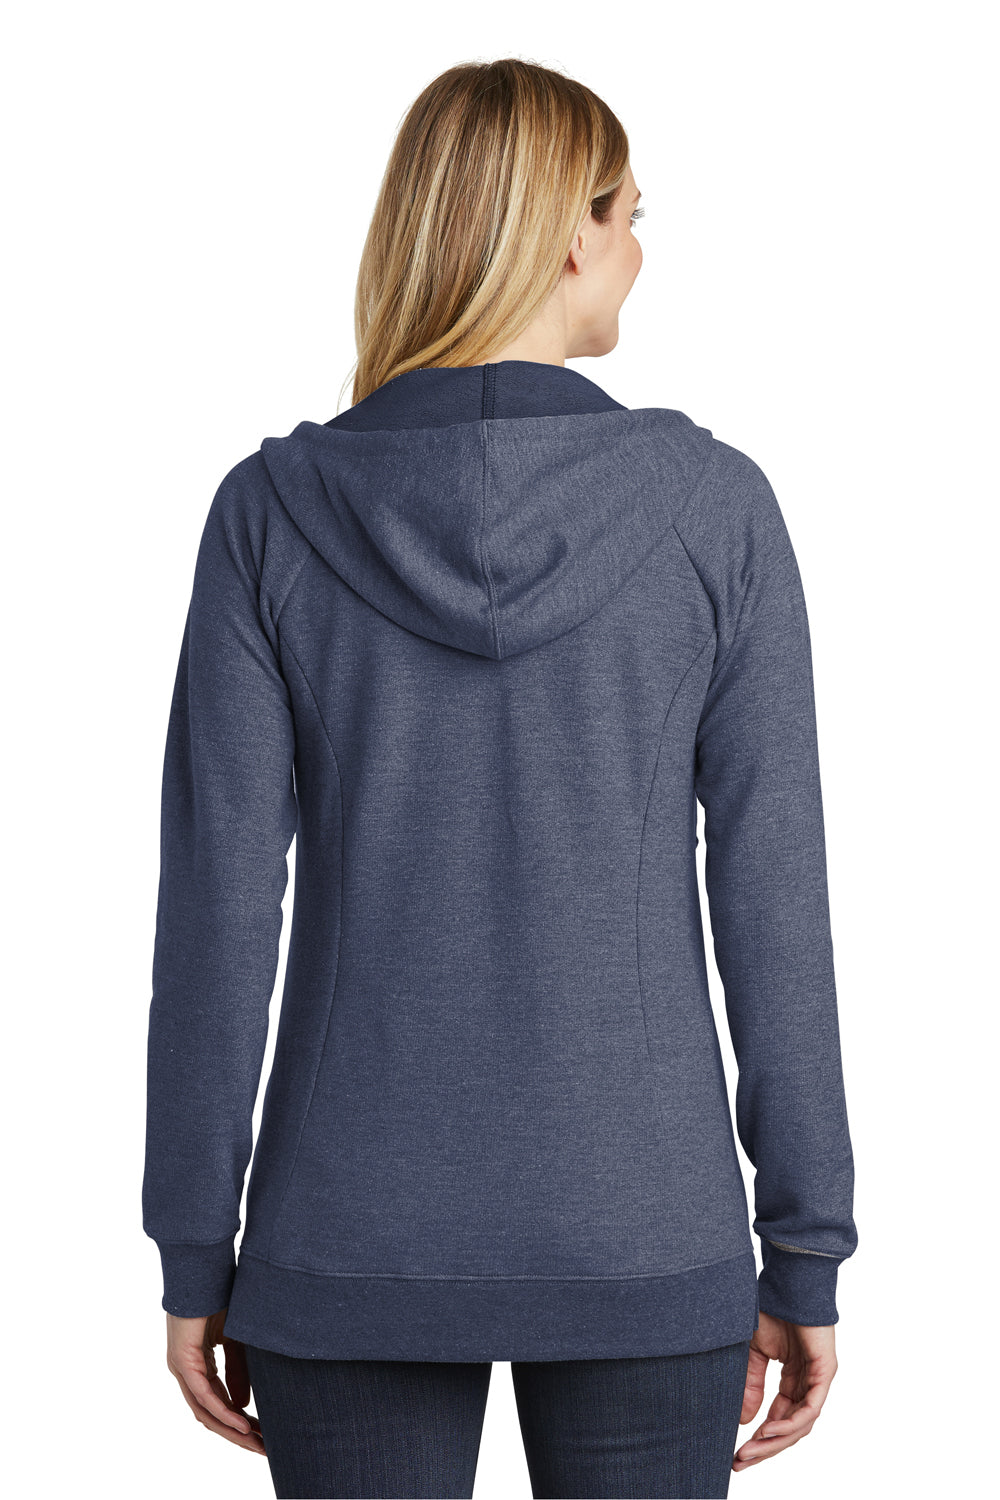 District DT456 Womens Perfect French Terry Full Zip Hooded Sweatshirt Hoodie Navy Blue Back